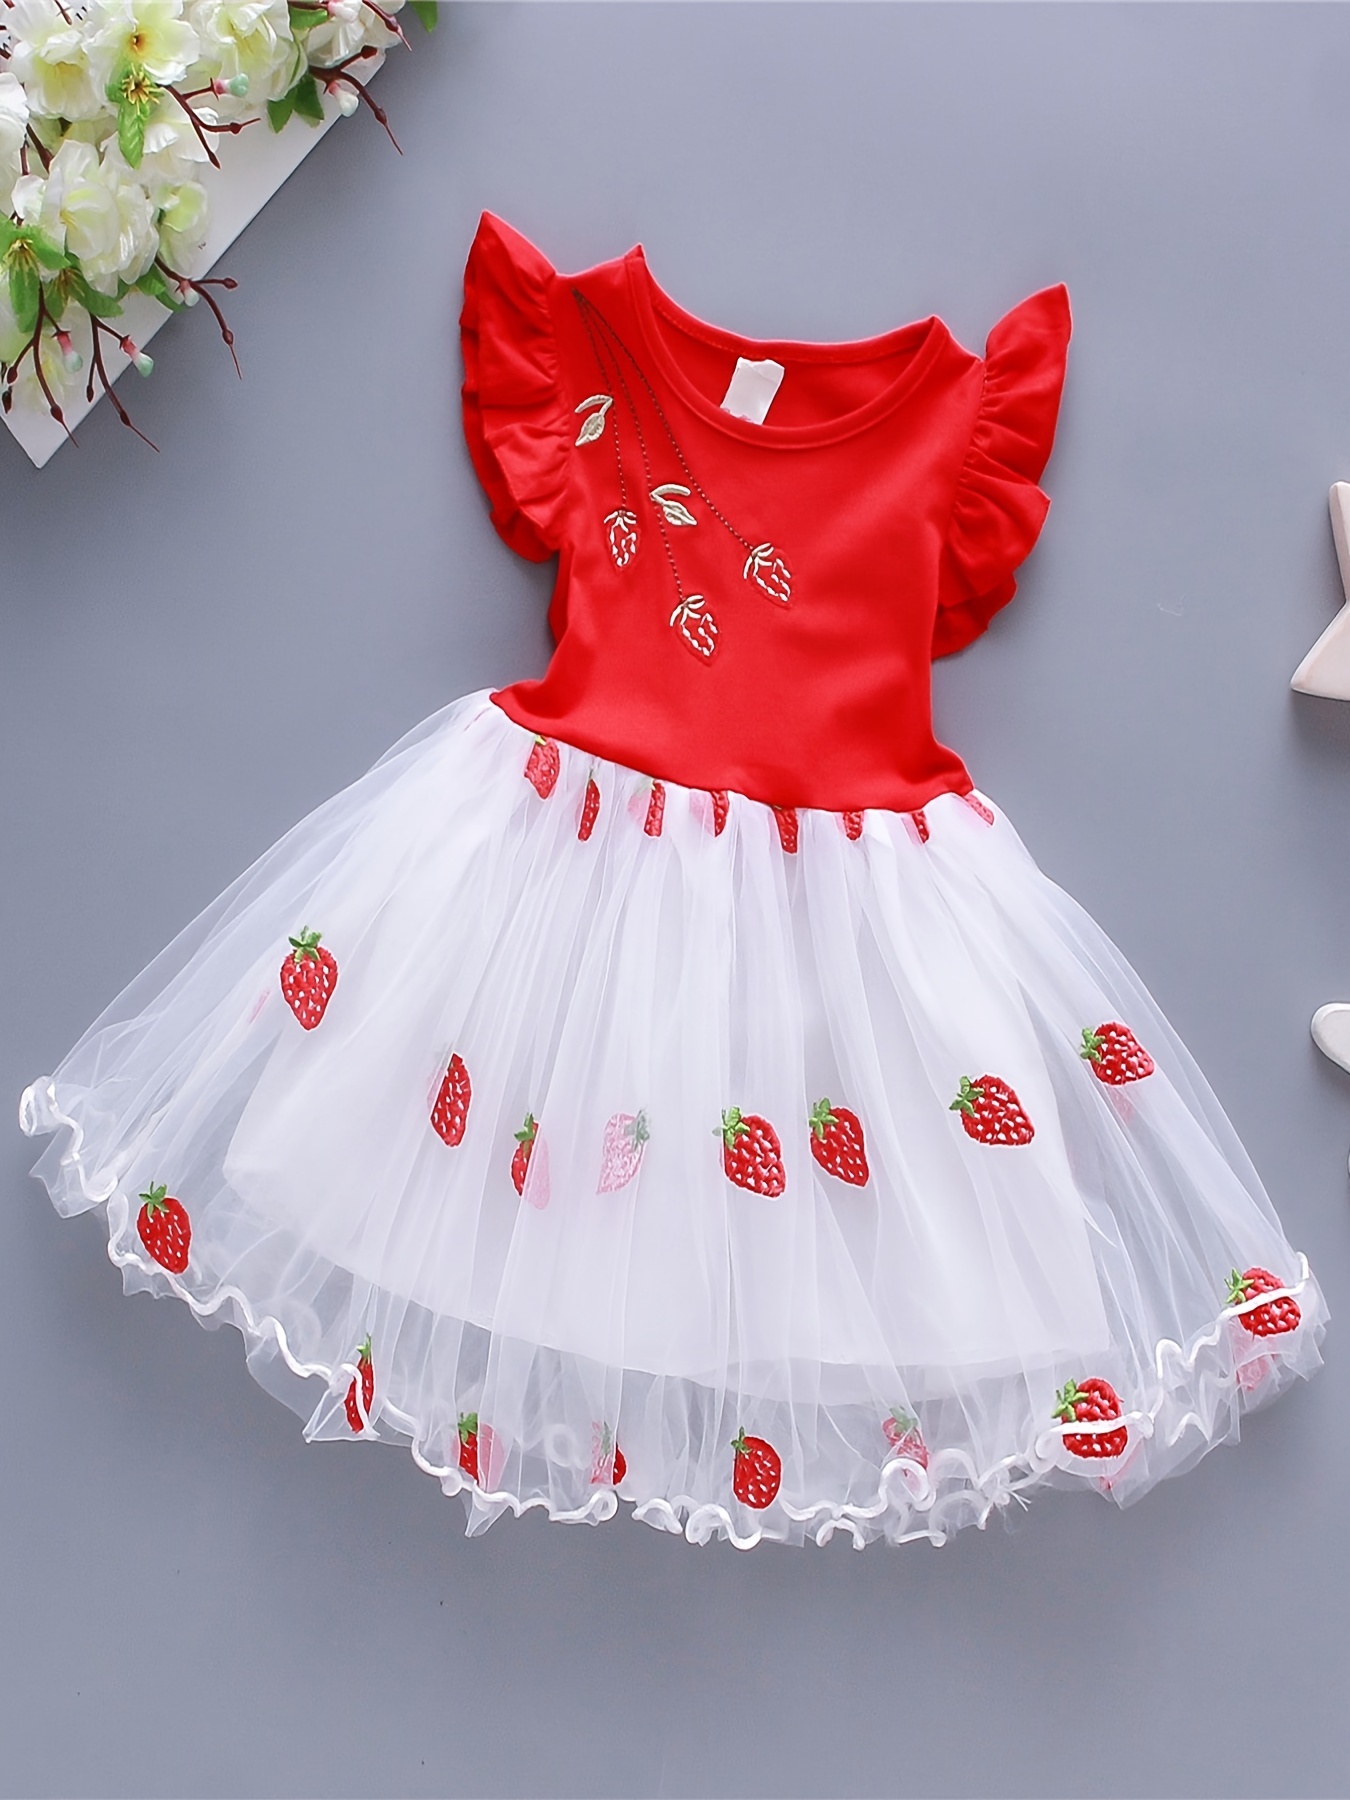 Best Price Baby Girls Cute Elegant Stitching Mesh Strawberry Print Dress For Summer Holiday Party